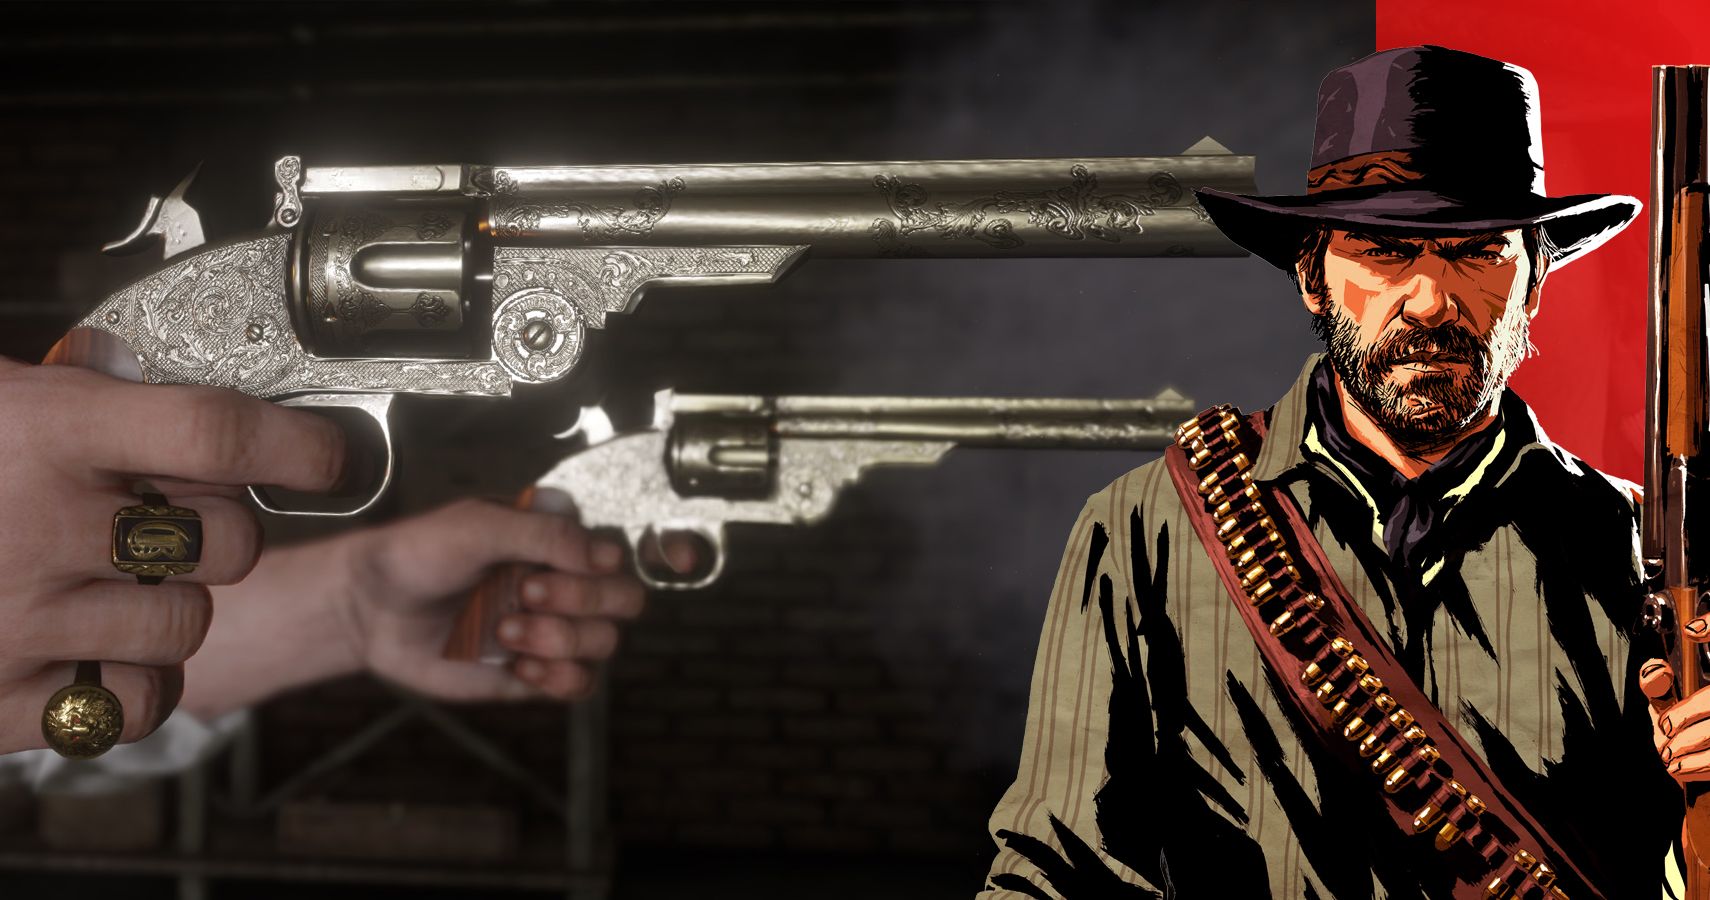 25 Strongest Weapons In Red Dead Redemption 2 (And Where Find Them)